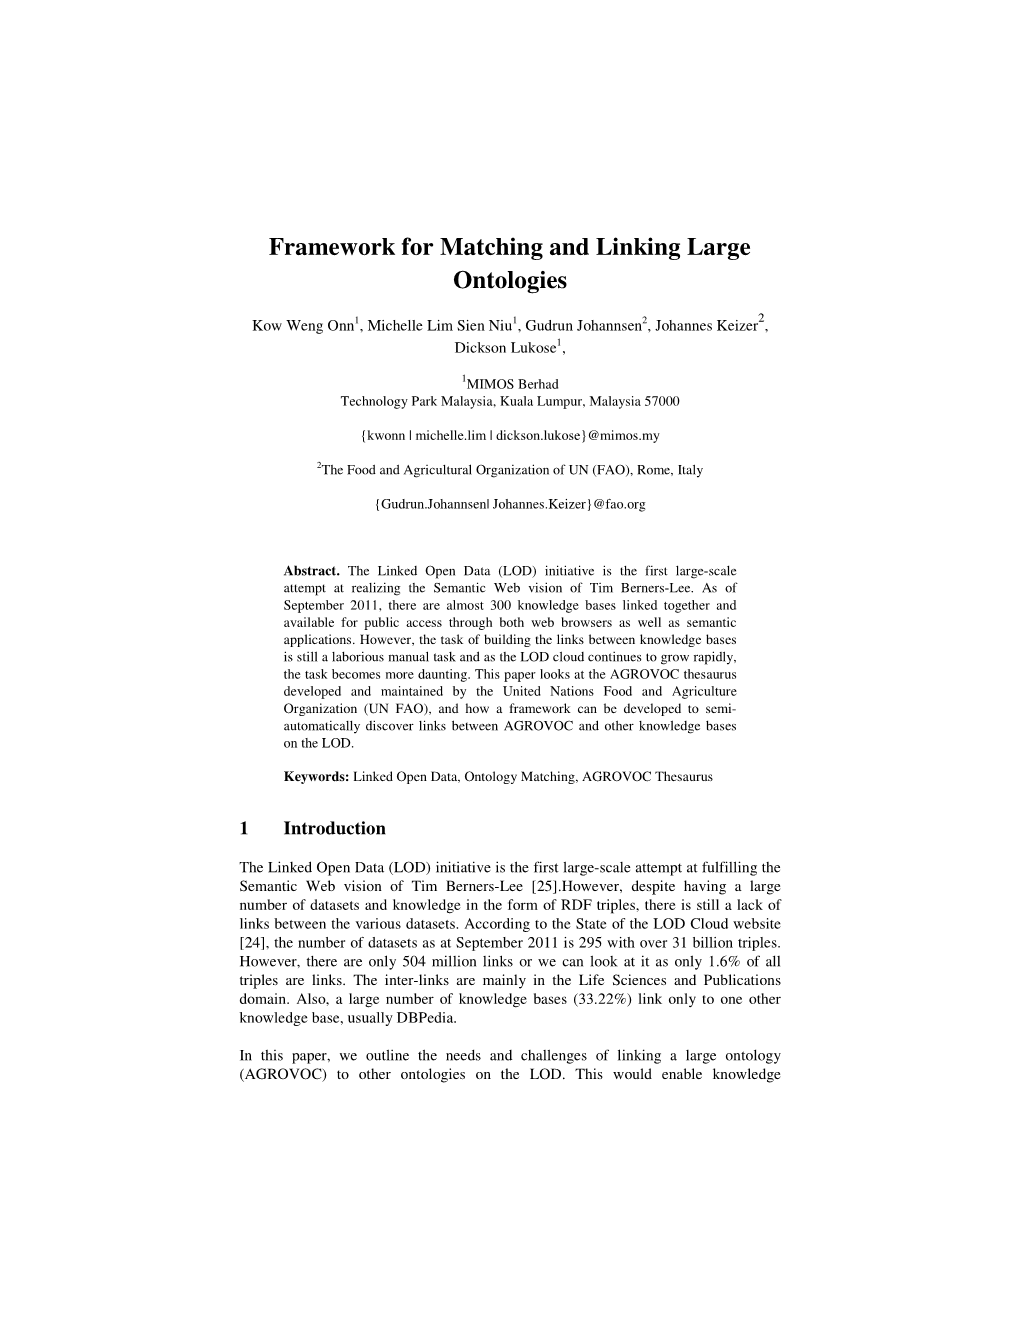 Framework for Matching and Linking Large Ontologies